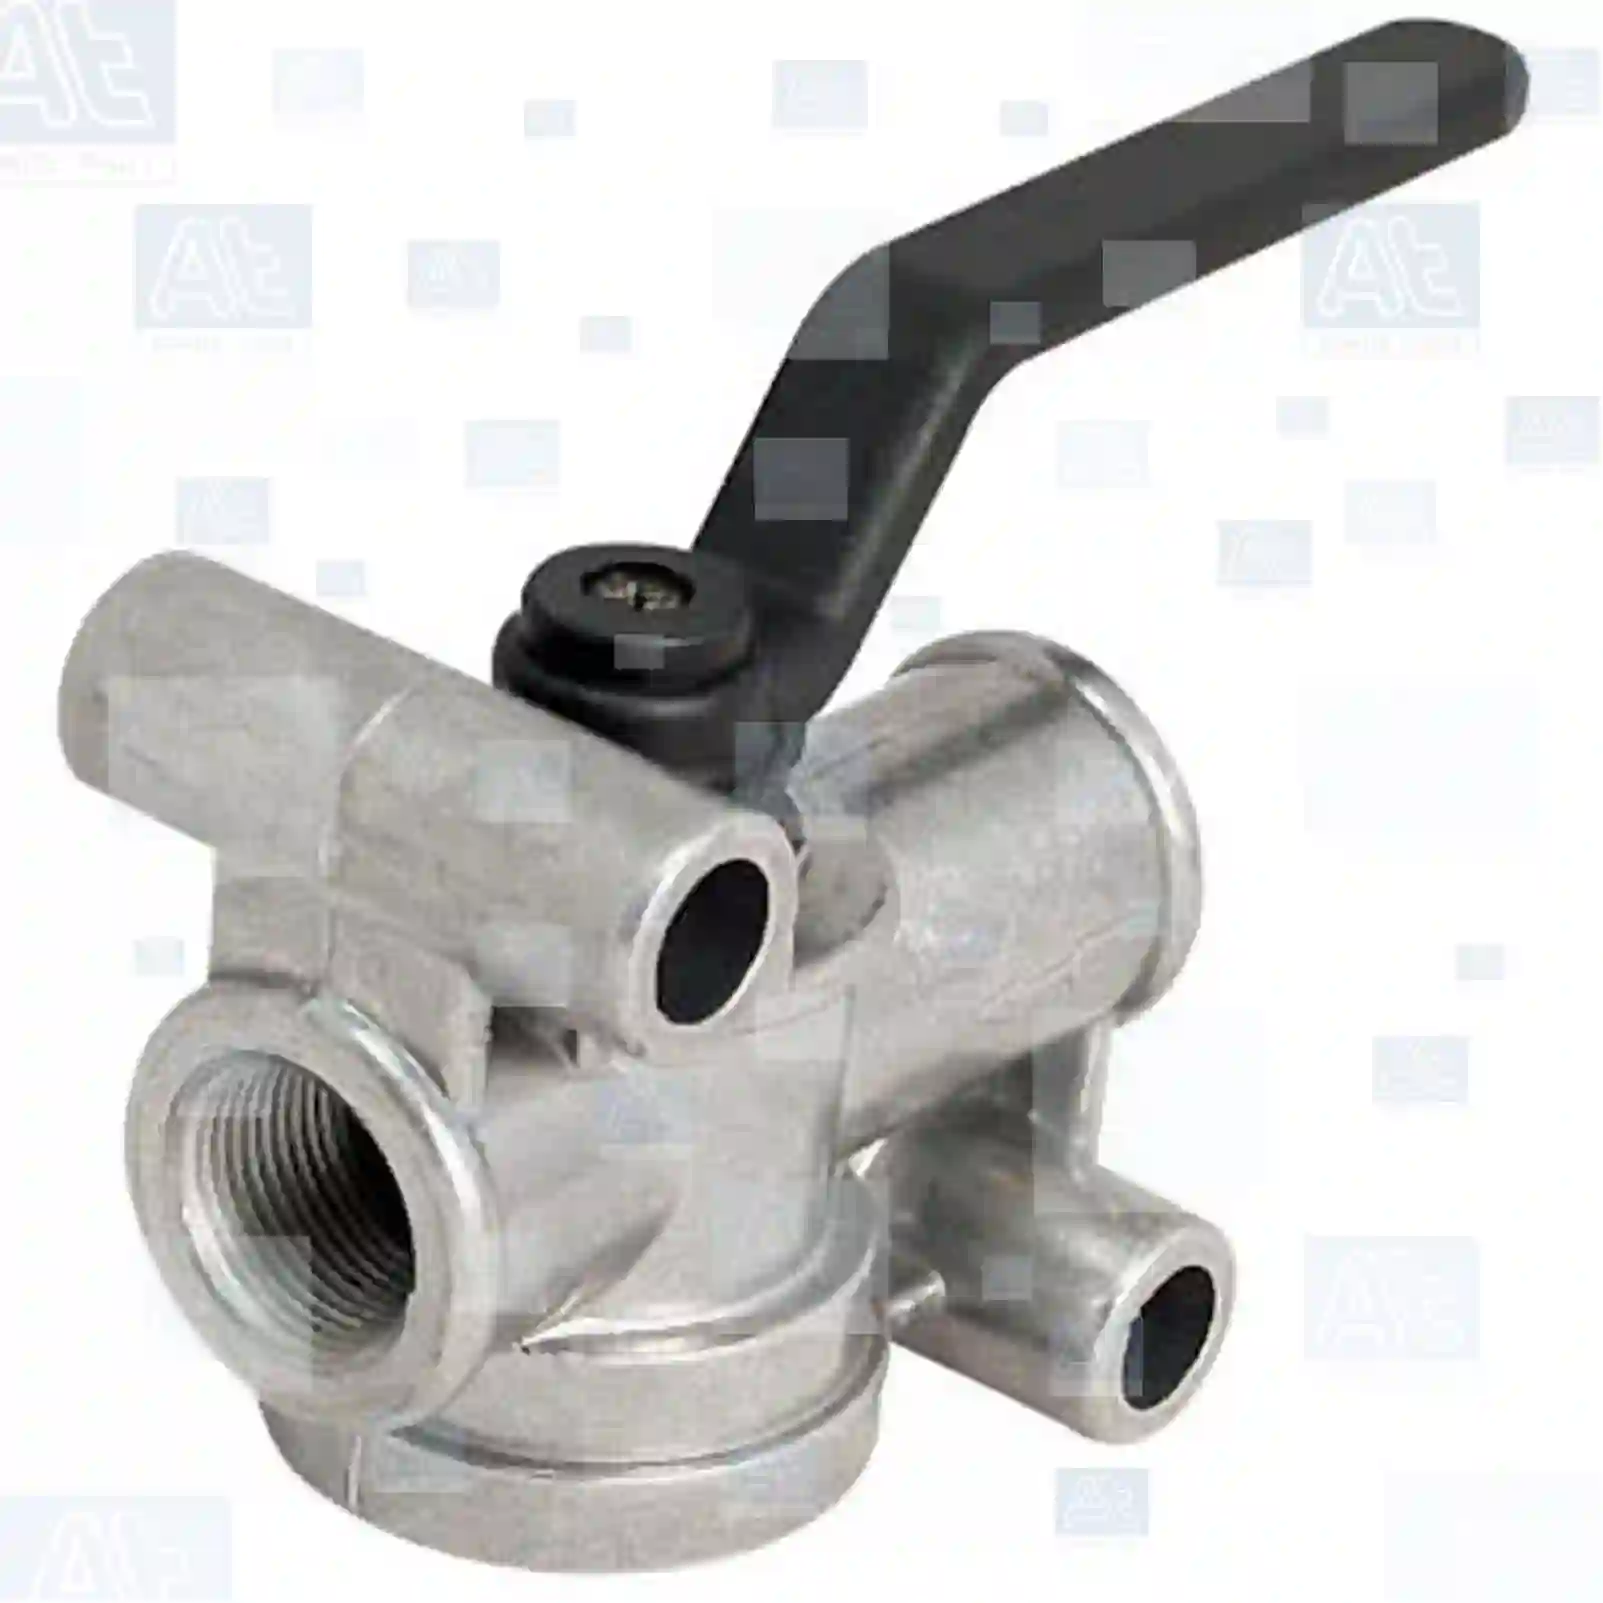 Shut off valve, at no 77714911, oem no: 0108756, 0631283, 0882330, 108756, 1229423, 1229423A, 1229423R, 631283, 882330, 01121692, H03098901, VSY981801, 110267700, 151117, 200205, 01121692, 08120461, 41035628, 78911, 500945171, 511236405, 88512306200, 90810120153, 0004290631, 0004290831, 0004291031, 0004291331, 0004291431, 0004291531, 0004291631, 495147, 49530011000, AIF0774, 0000719576, 0037535600, 5000241986, 5021170150, 5430061070, 4425005800, 124978, 1738493, 1894521, 1912315, 1934818, 051462, 8283010000, 82830100000, 351565, 6604358, ZG50723-0008 At Spare Part | Engine, Accelerator Pedal, Camshaft, Connecting Rod, Crankcase, Crankshaft, Cylinder Head, Engine Suspension Mountings, Exhaust Manifold, Exhaust Gas Recirculation, Filter Kits, Flywheel Housing, General Overhaul Kits, Engine, Intake Manifold, Oil Cleaner, Oil Cooler, Oil Filter, Oil Pump, Oil Sump, Piston & Liner, Sensor & Switch, Timing Case, Turbocharger, Cooling System, Belt Tensioner, Coolant Filter, Coolant Pipe, Corrosion Prevention Agent, Drive, Expansion Tank, Fan, Intercooler, Monitors & Gauges, Radiator, Thermostat, V-Belt / Timing belt, Water Pump, Fuel System, Electronical Injector Unit, Feed Pump, Fuel Filter, cpl., Fuel Gauge Sender,  Fuel Line, Fuel Pump, Fuel Tank, Injection Line Kit, Injection Pump, Exhaust System, Clutch & Pedal, Gearbox, Propeller Shaft, Axles, Brake System, Hubs & Wheels, Suspension, Leaf Spring, Universal Parts / Accessories, Steering, Electrical System, Cabin Shut off valve, at no 77714911, oem no: 0108756, 0631283, 0882330, 108756, 1229423, 1229423A, 1229423R, 631283, 882330, 01121692, H03098901, VSY981801, 110267700, 151117, 200205, 01121692, 08120461, 41035628, 78911, 500945171, 511236405, 88512306200, 90810120153, 0004290631, 0004290831, 0004291031, 0004291331, 0004291431, 0004291531, 0004291631, 495147, 49530011000, AIF0774, 0000719576, 0037535600, 5000241986, 5021170150, 5430061070, 4425005800, 124978, 1738493, 1894521, 1912315, 1934818, 051462, 8283010000, 82830100000, 351565, 6604358, ZG50723-0008 At Spare Part | Engine, Accelerator Pedal, Camshaft, Connecting Rod, Crankcase, Crankshaft, Cylinder Head, Engine Suspension Mountings, Exhaust Manifold, Exhaust Gas Recirculation, Filter Kits, Flywheel Housing, General Overhaul Kits, Engine, Intake Manifold, Oil Cleaner, Oil Cooler, Oil Filter, Oil Pump, Oil Sump, Piston & Liner, Sensor & Switch, Timing Case, Turbocharger, Cooling System, Belt Tensioner, Coolant Filter, Coolant Pipe, Corrosion Prevention Agent, Drive, Expansion Tank, Fan, Intercooler, Monitors & Gauges, Radiator, Thermostat, V-Belt / Timing belt, Water Pump, Fuel System, Electronical Injector Unit, Feed Pump, Fuel Filter, cpl., Fuel Gauge Sender,  Fuel Line, Fuel Pump, Fuel Tank, Injection Line Kit, Injection Pump, Exhaust System, Clutch & Pedal, Gearbox, Propeller Shaft, Axles, Brake System, Hubs & Wheels, Suspension, Leaf Spring, Universal Parts / Accessories, Steering, Electrical System, Cabin